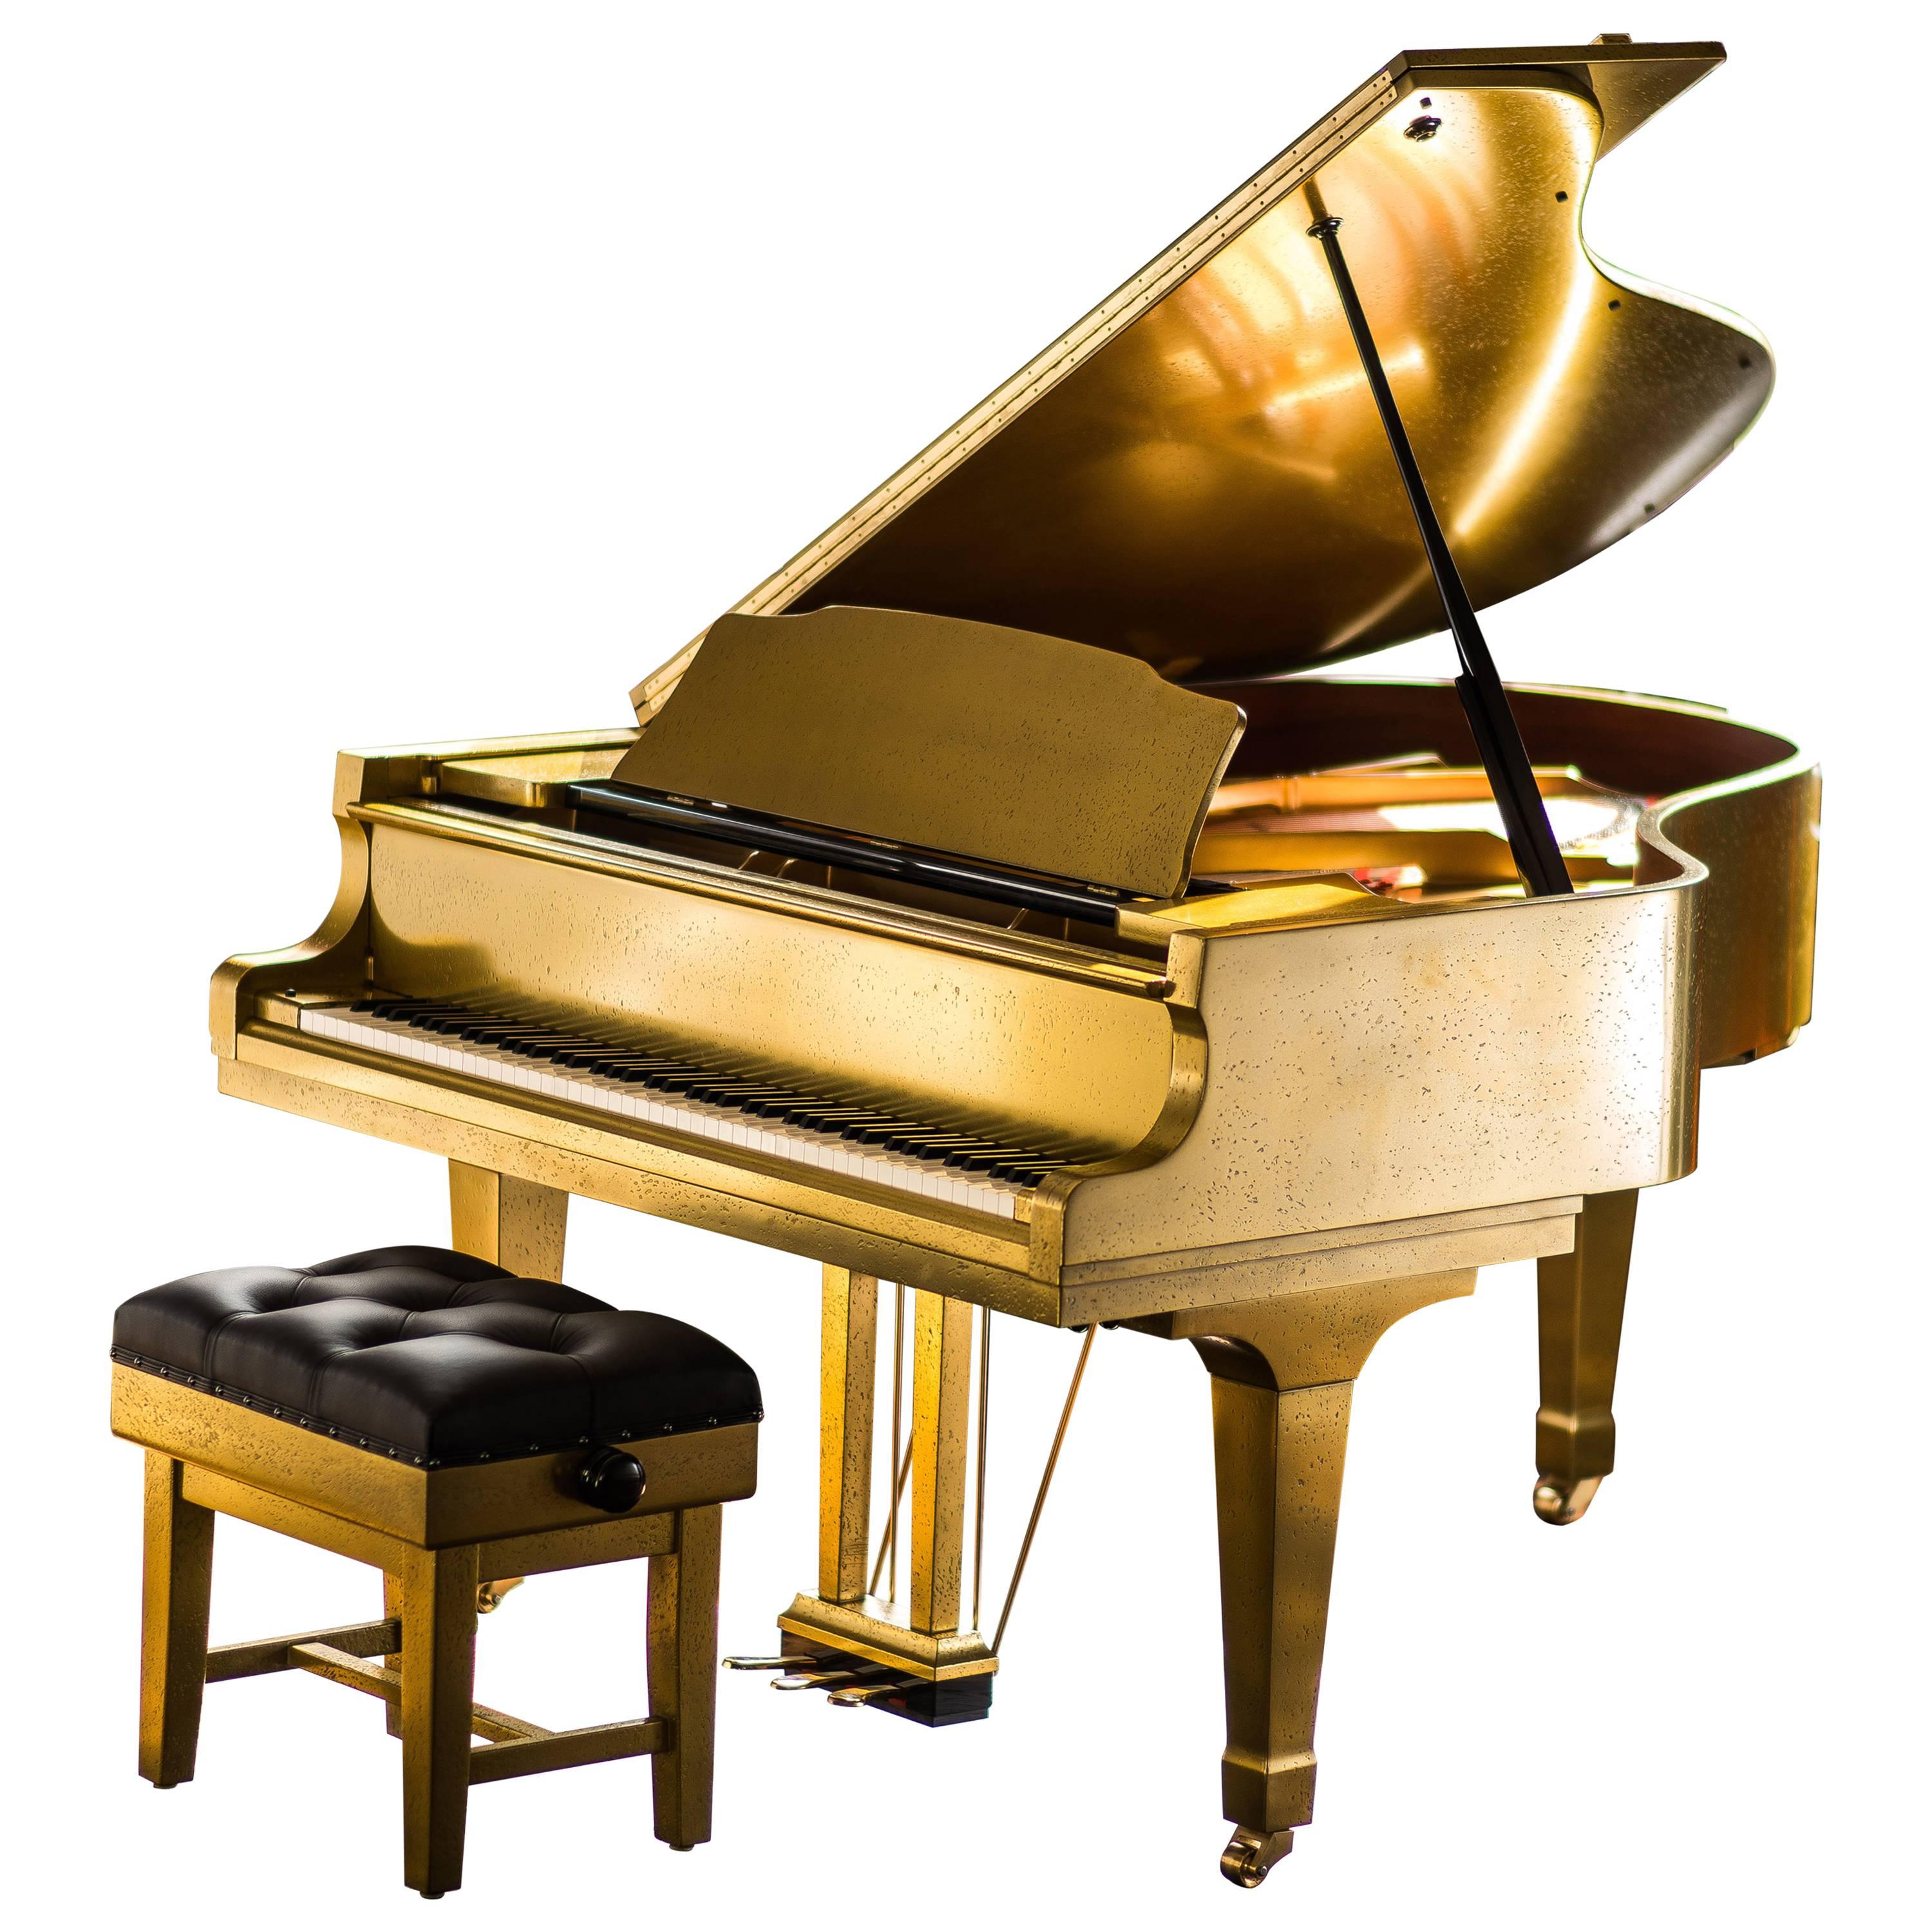 Bespoke Metal Coated Kawai RX-3 Grand Piano and Leather Concert Stool For Sale